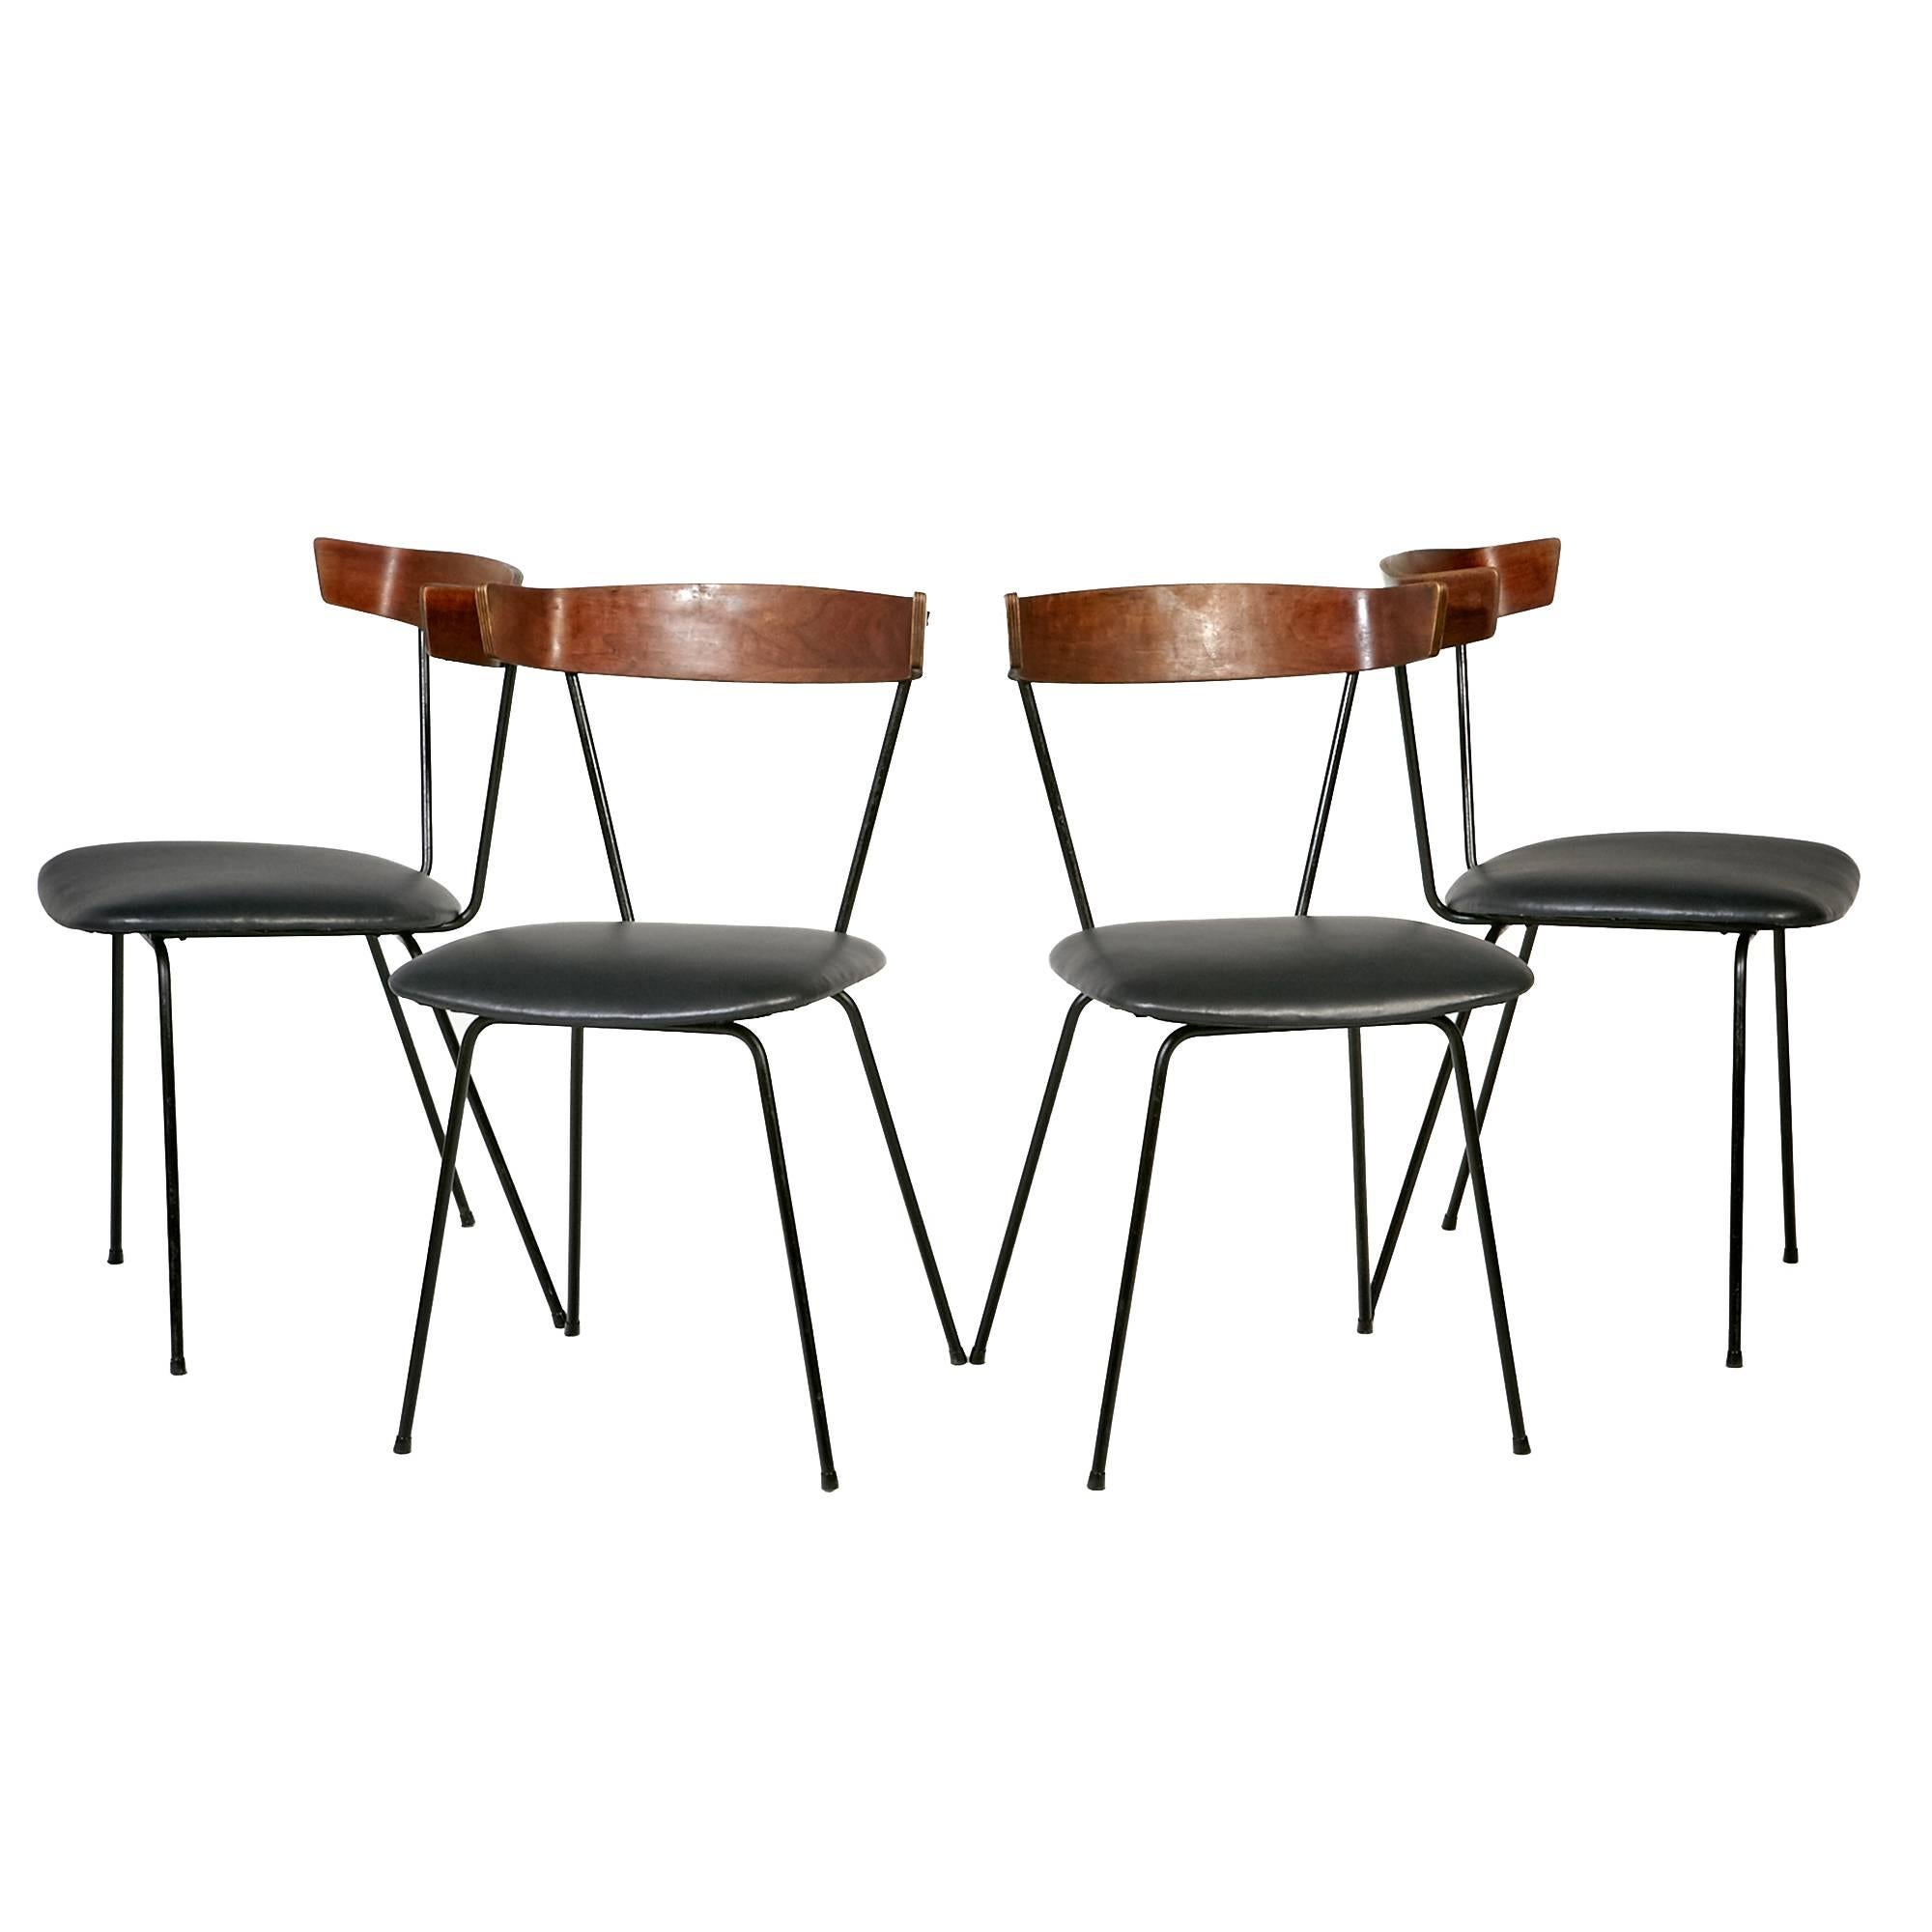 American Paul McCobb Iron Dining Chairs, Set of Four